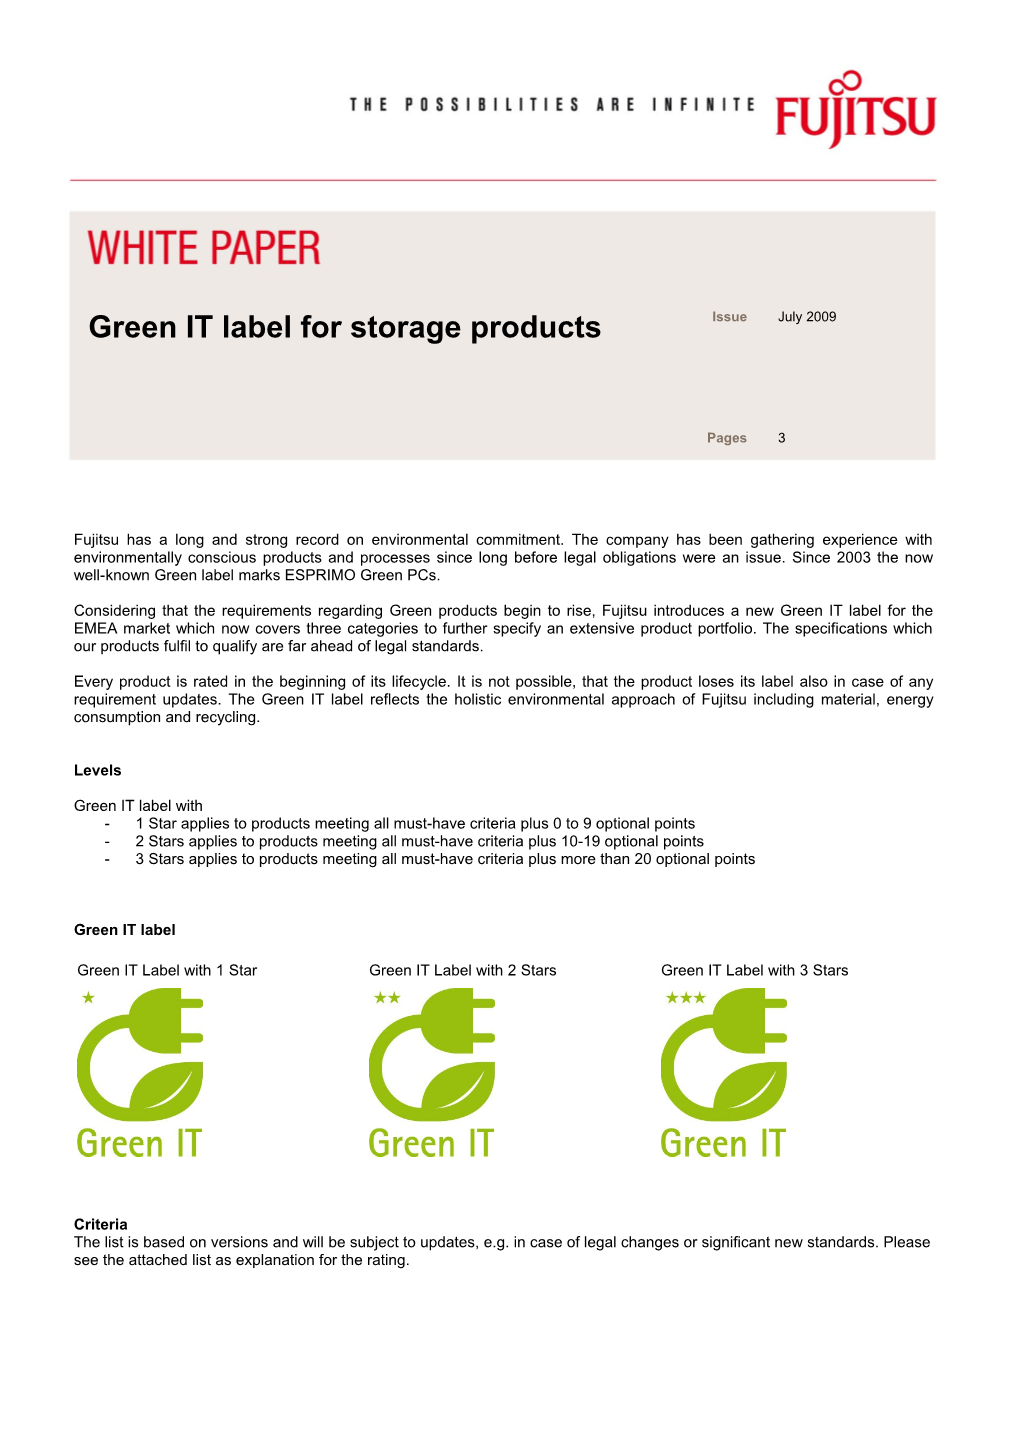 Green IT Label for Storage Products